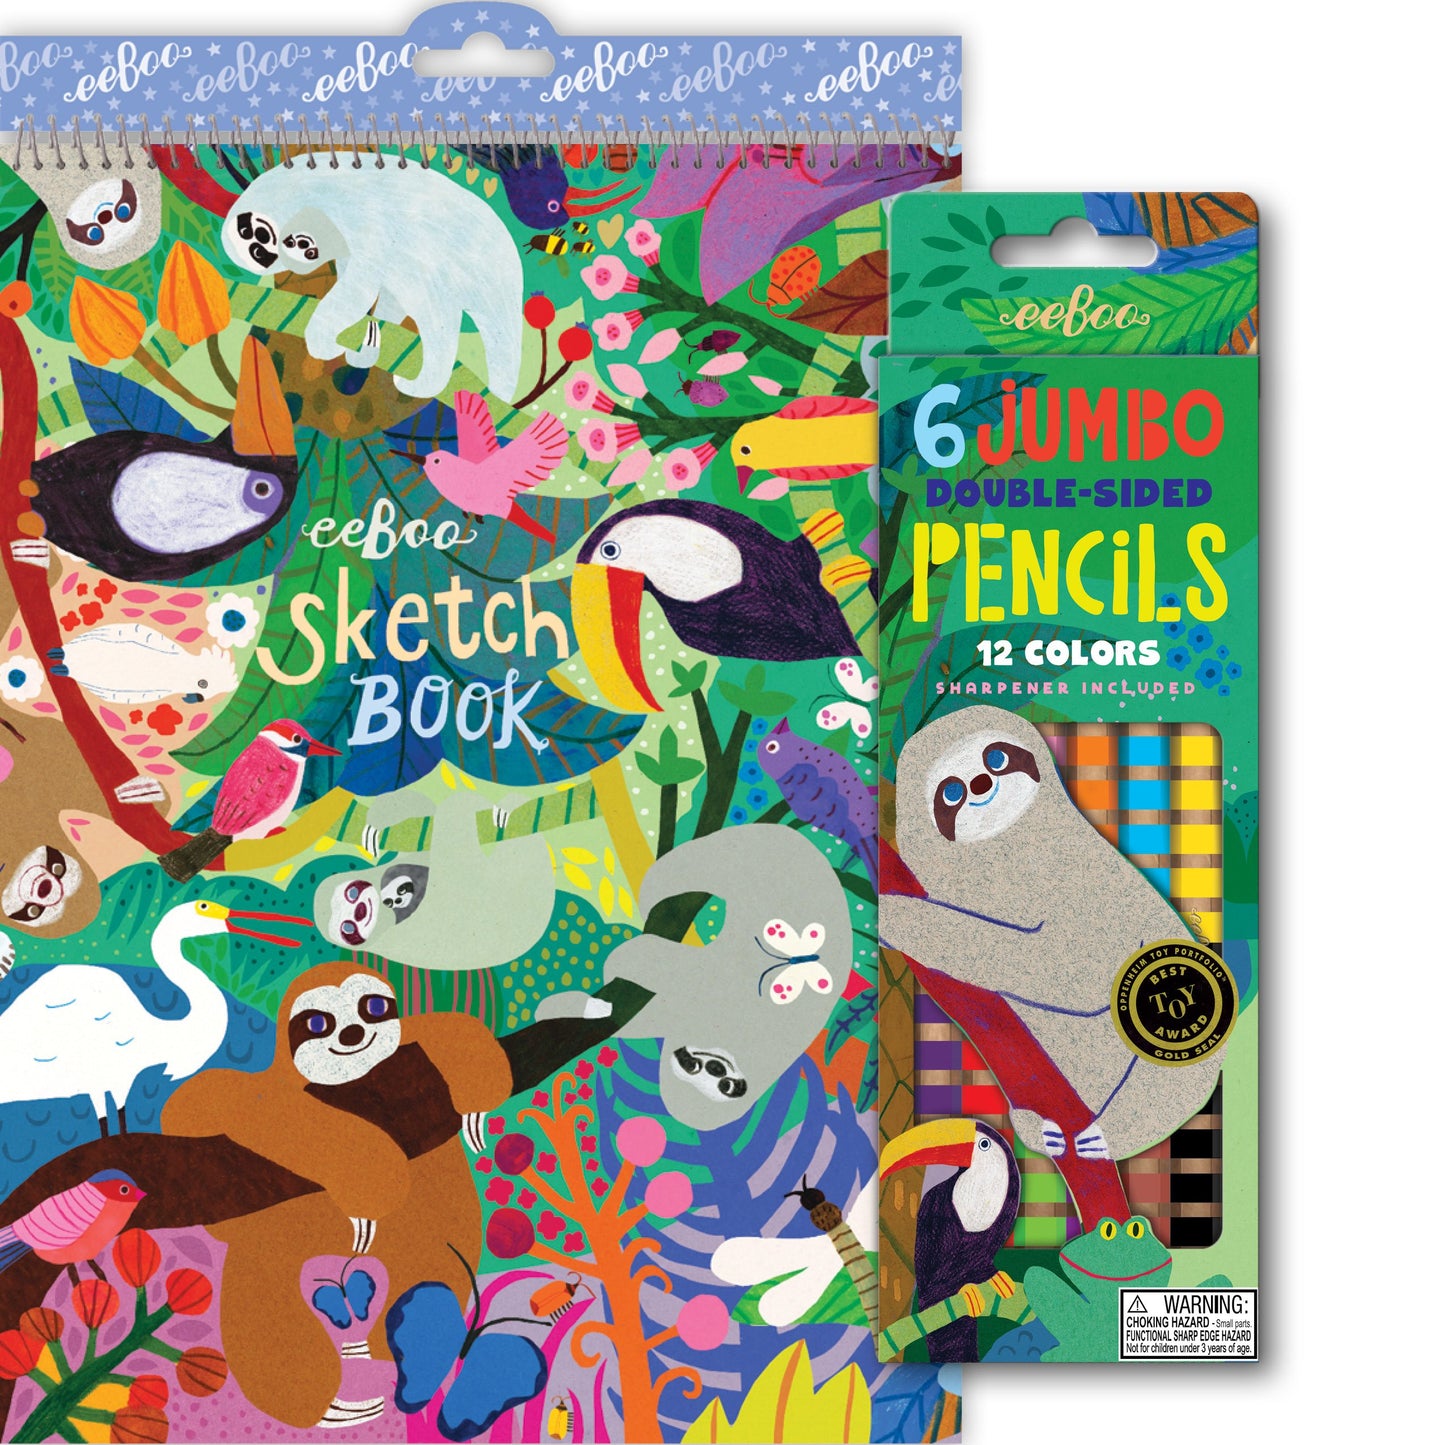 Sloths 6 Jumbo Double-Sided Pencils and Sketchbook